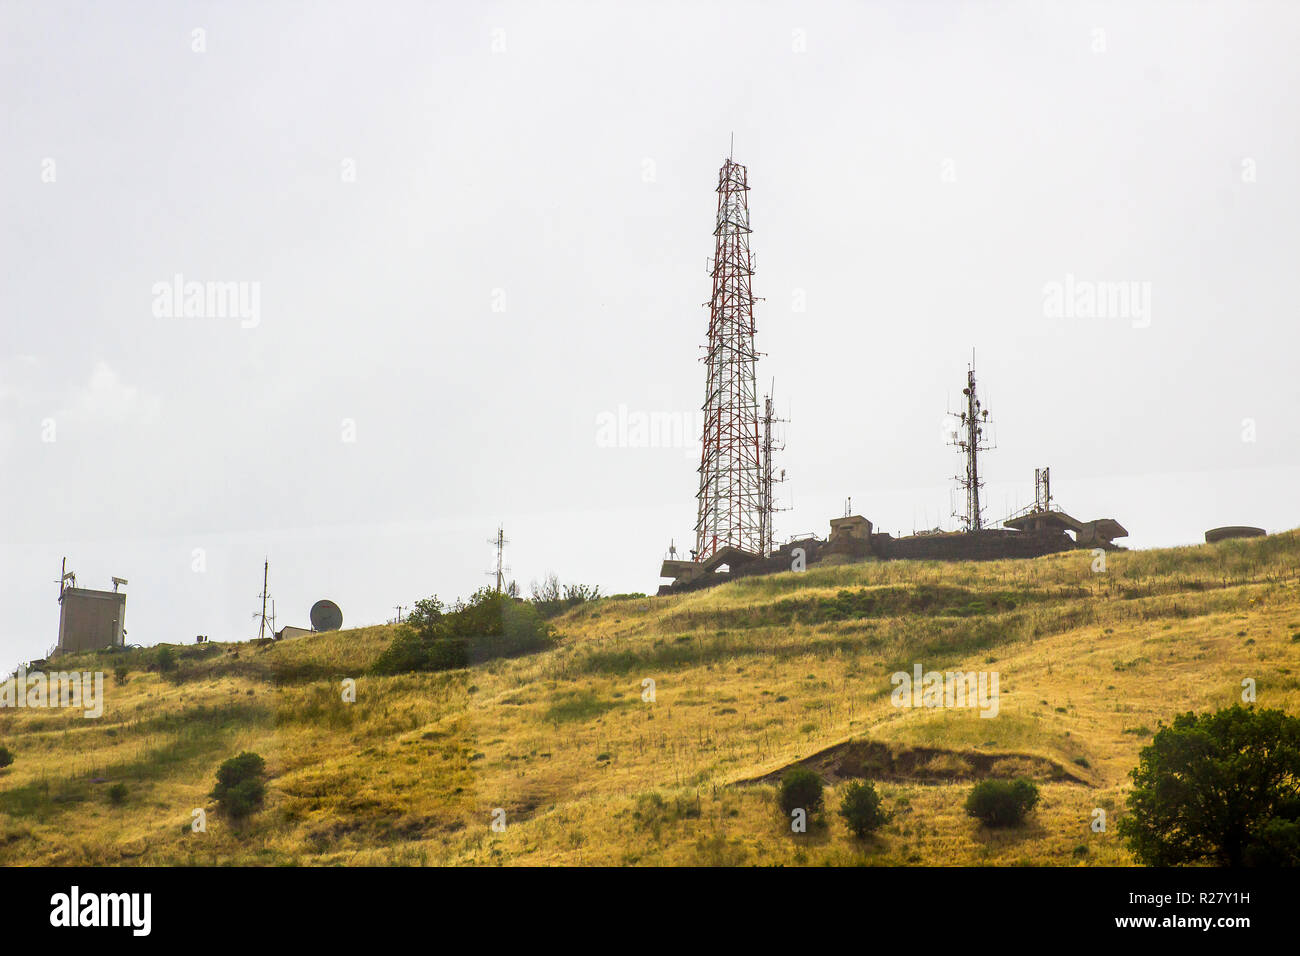 4 May 2018 An Israeli monitoring station in the Golan heights Israel taken on a dull overcast day. Radio masts, aerials and satellite dishes can be se Stock Photo